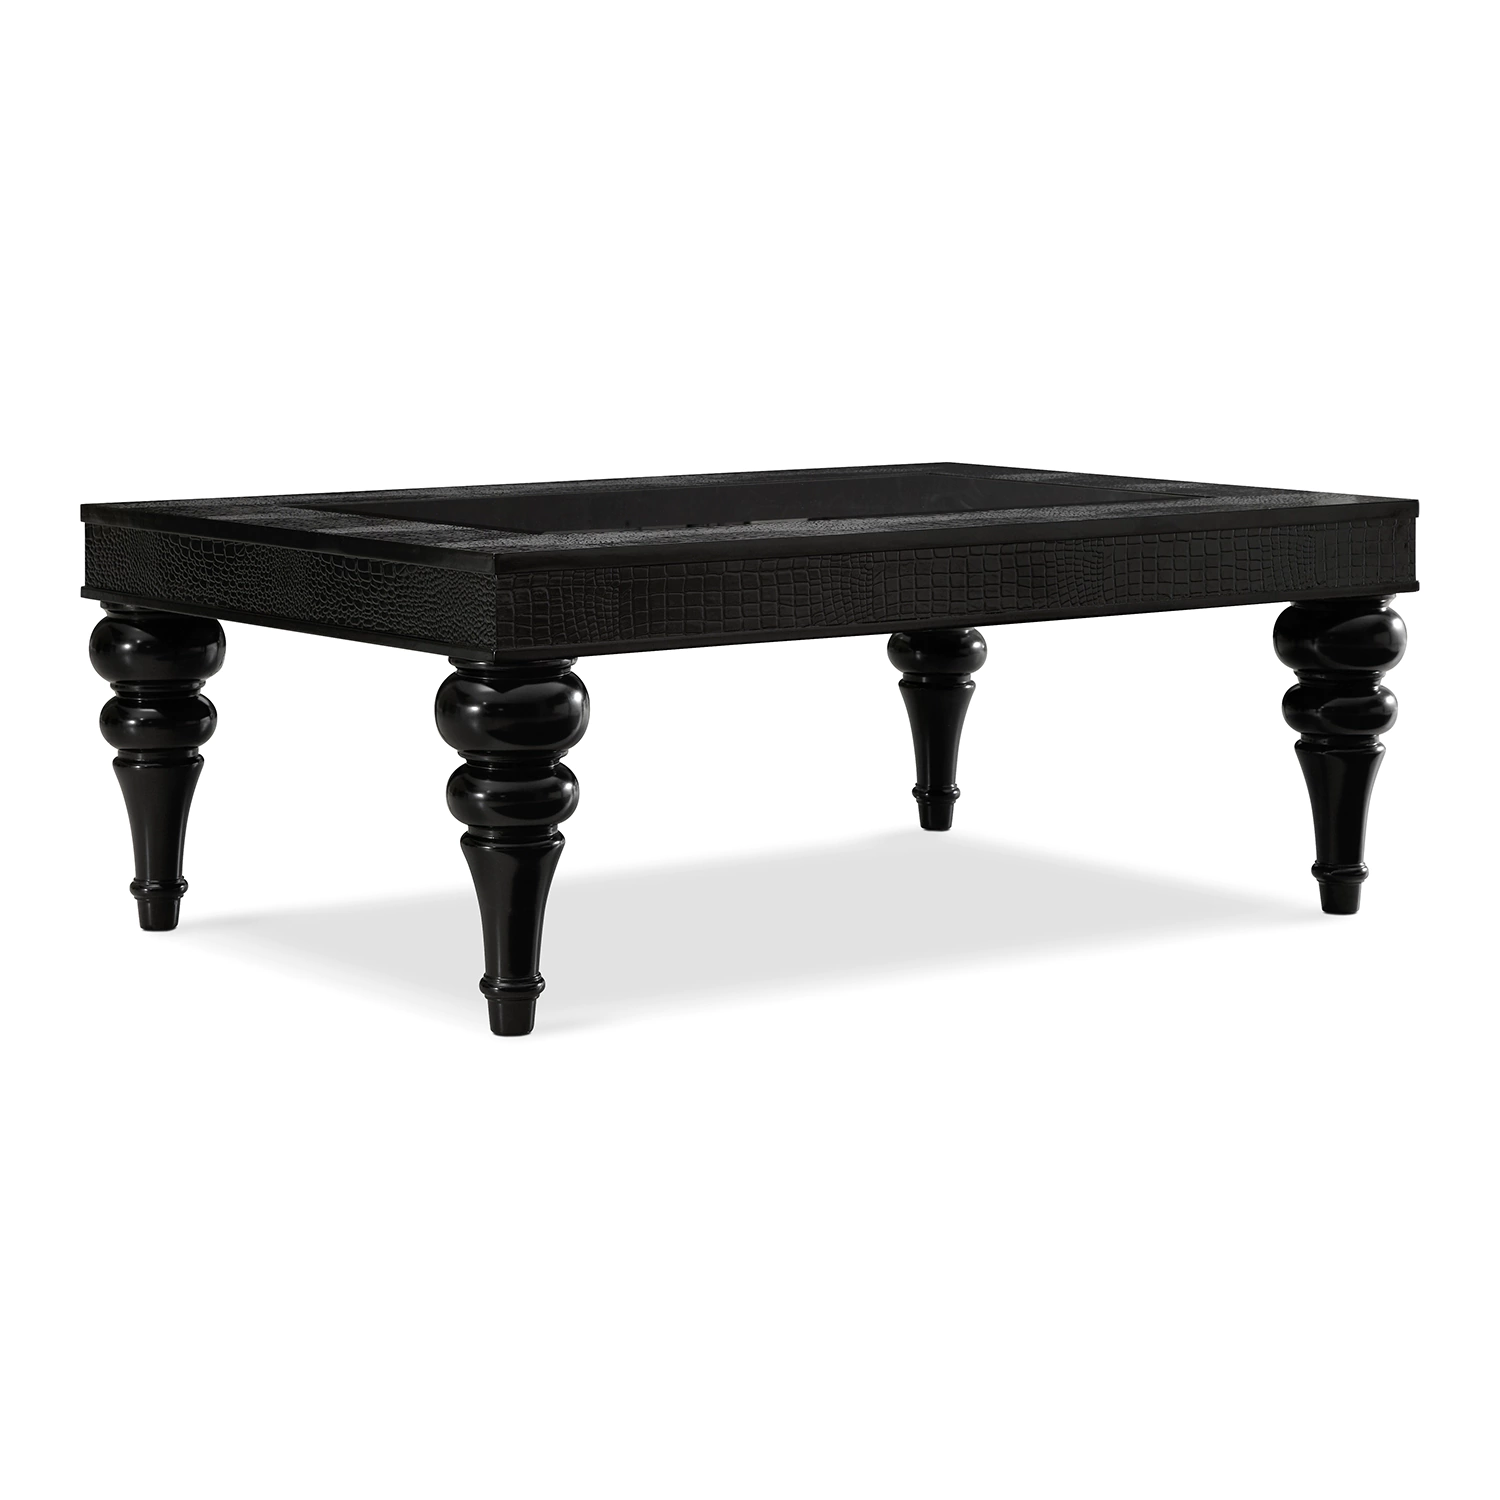 coffee tables living room american signature bombay company marble top accent table tap change paradiso black croc chaise lounge cloth runners dale tiffany lamp sets small round